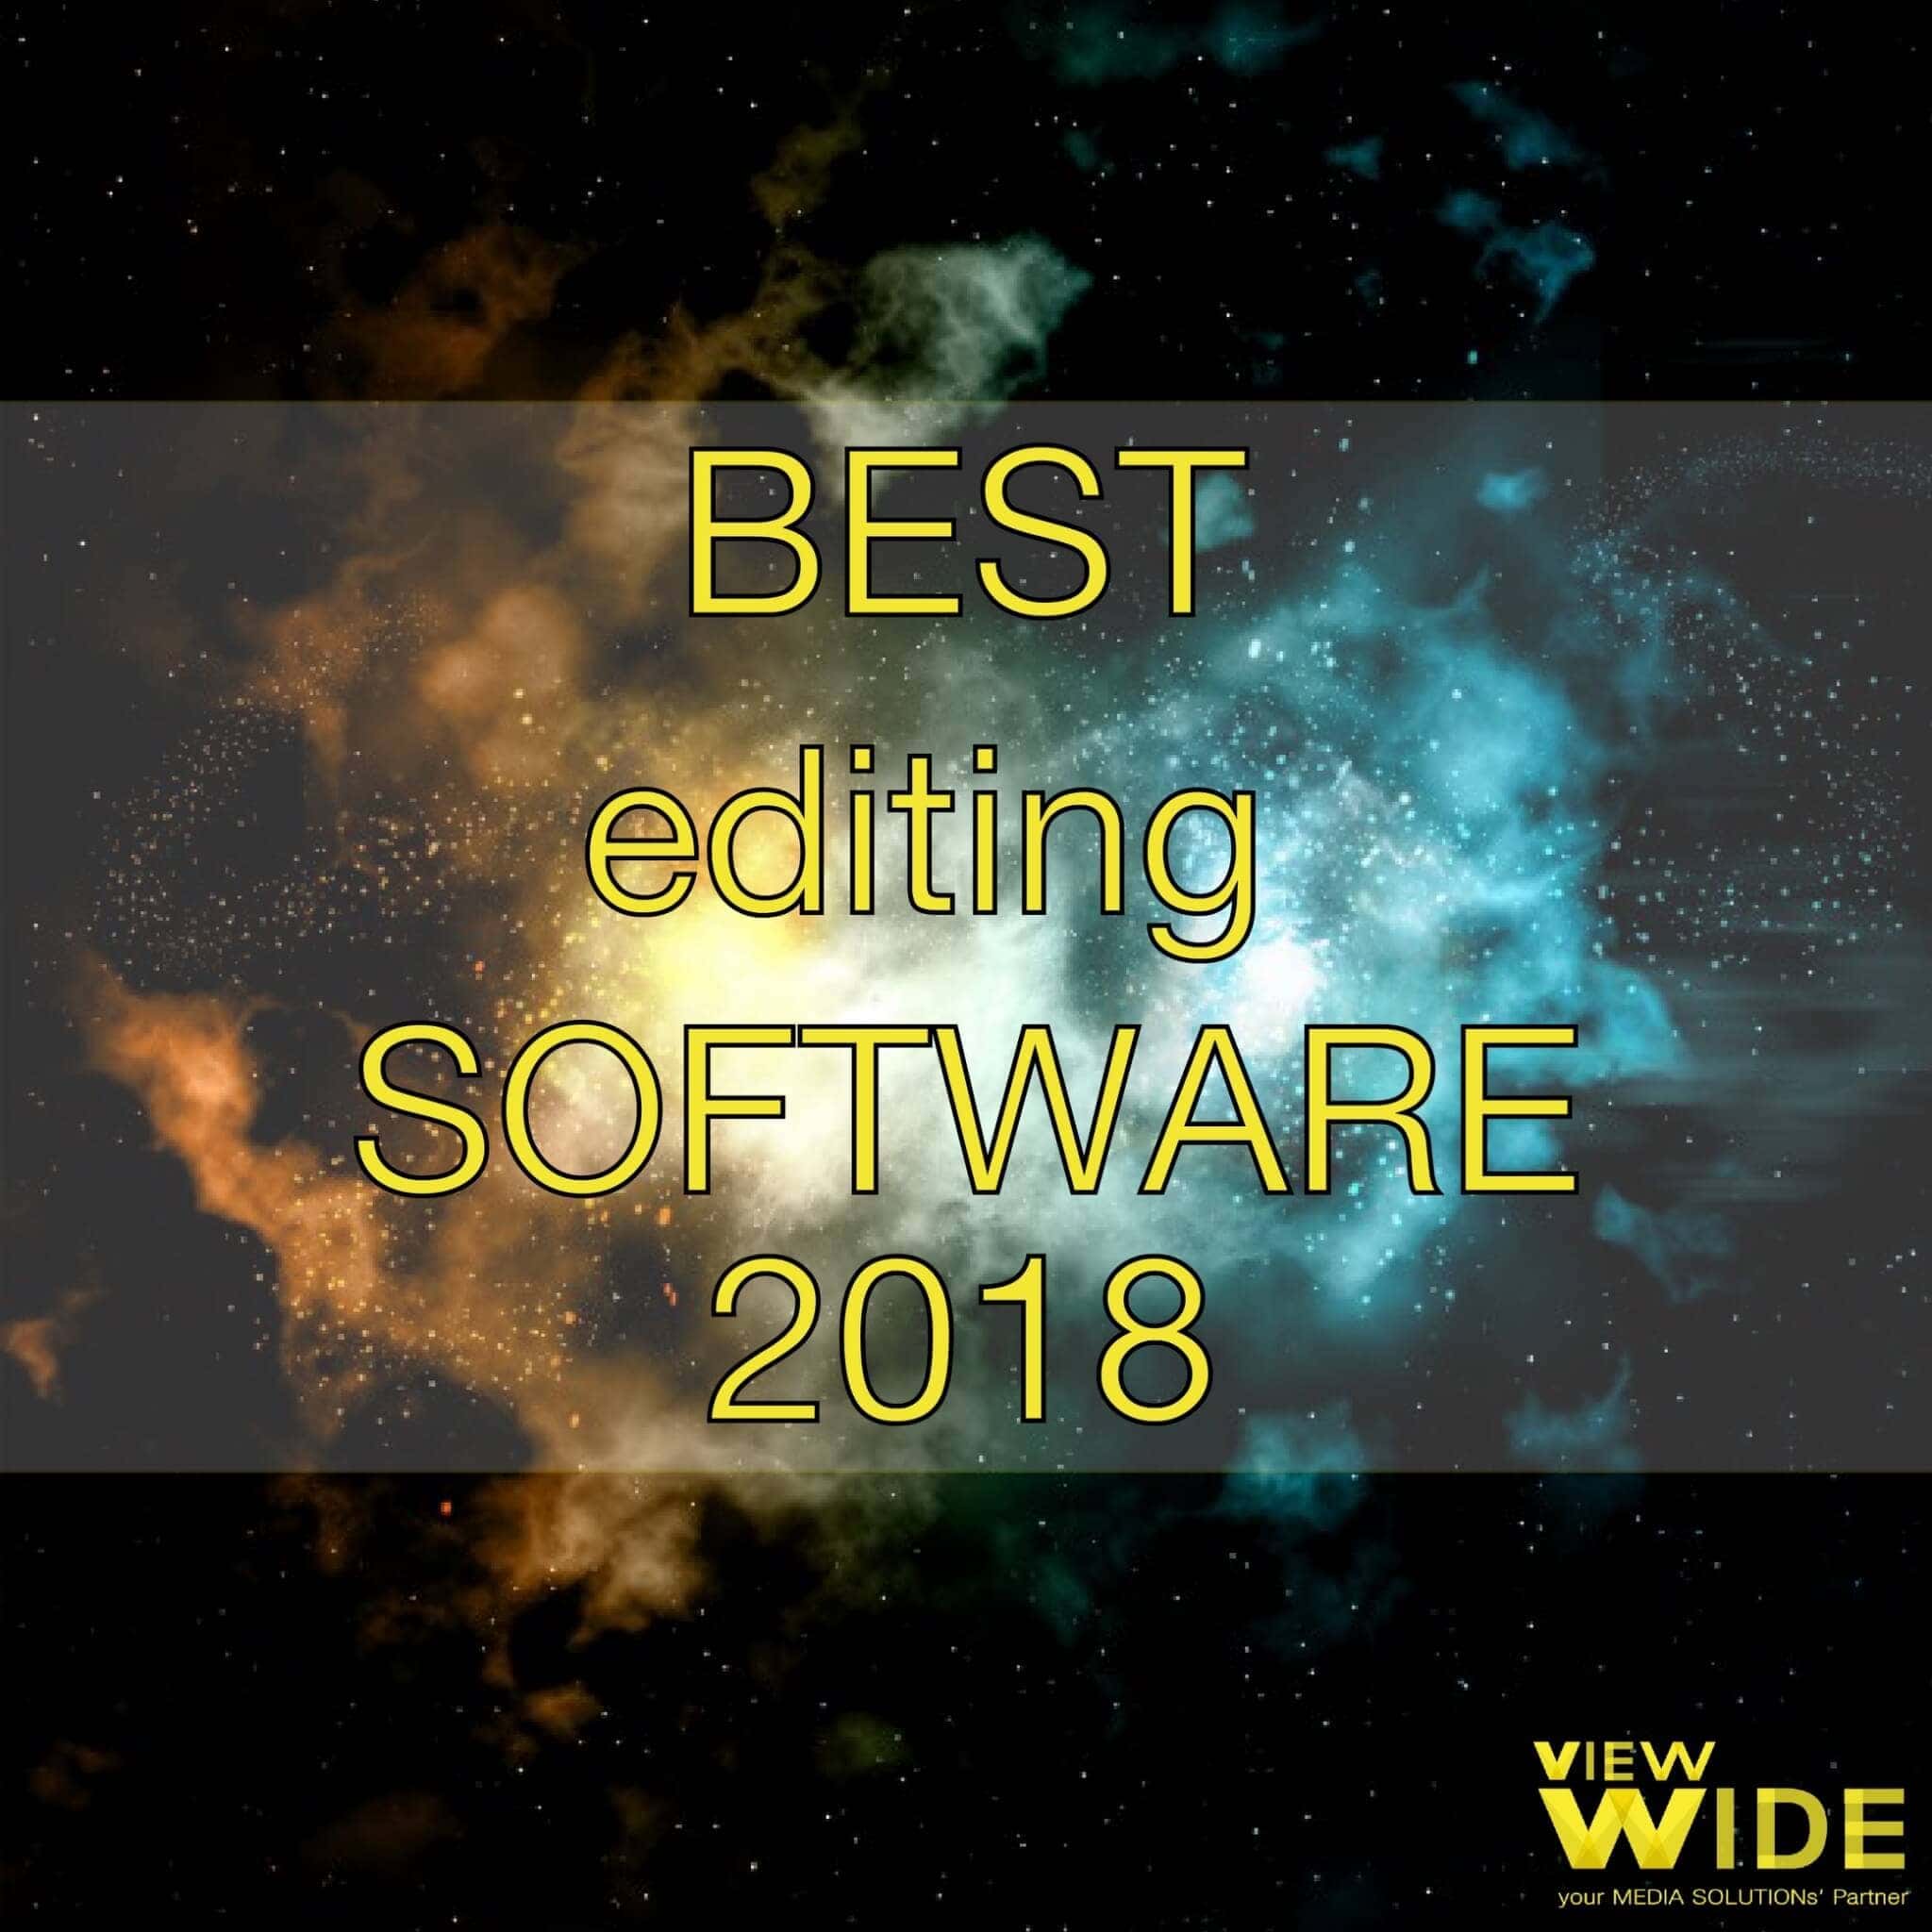 Best Editing Software 2018